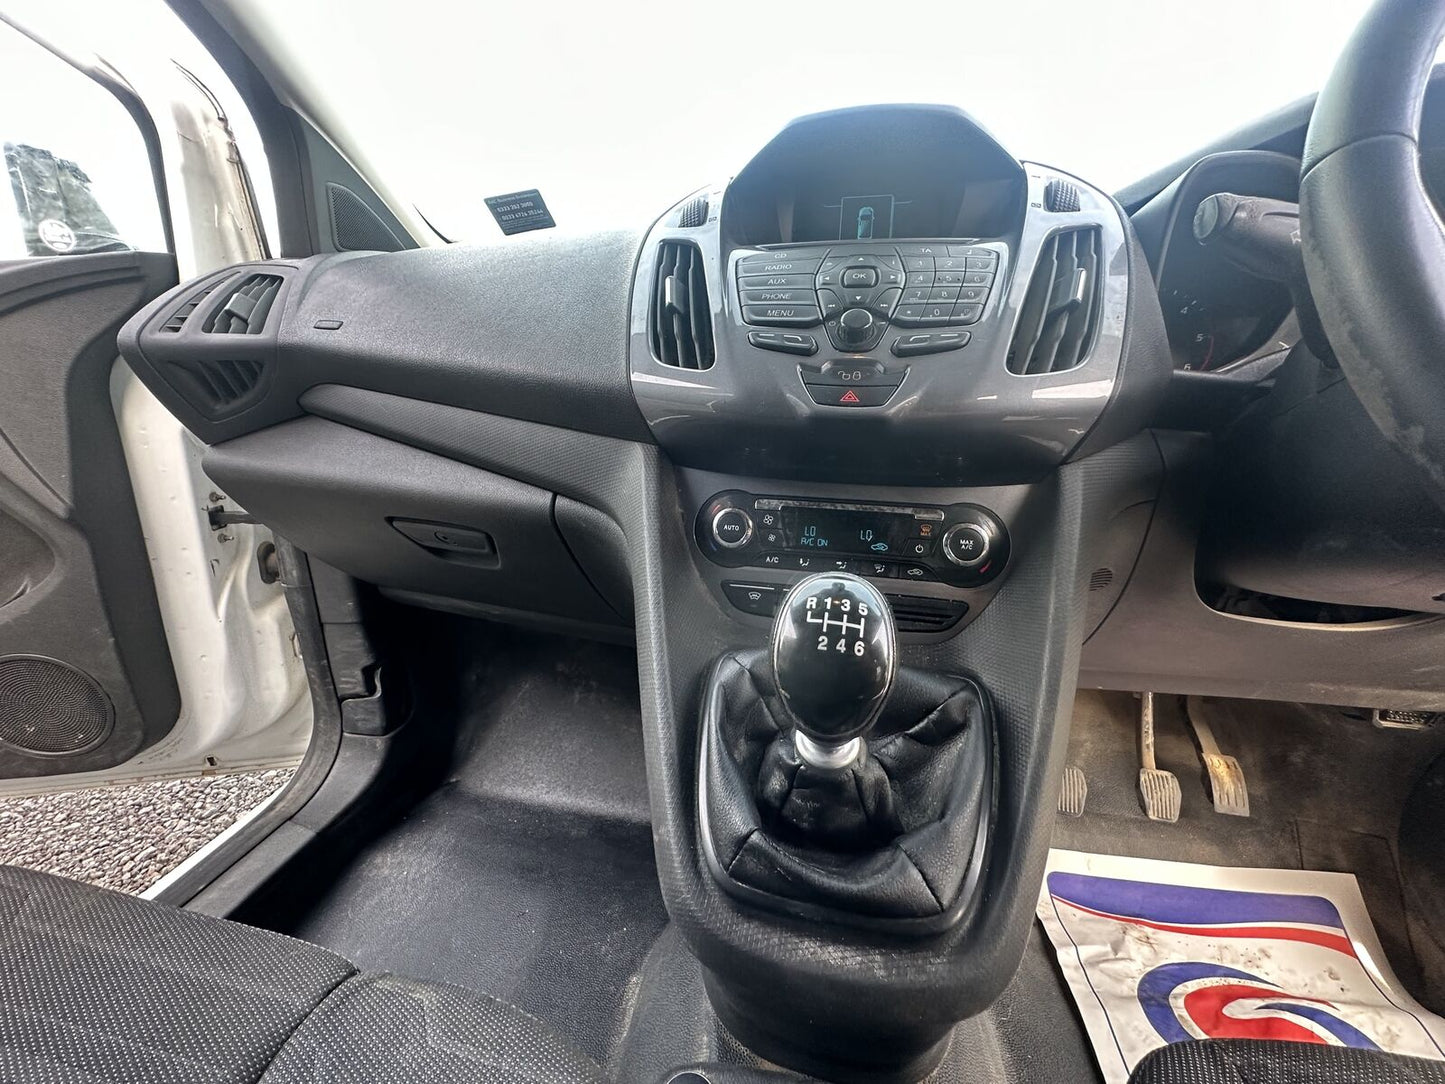 Bid on DECENT INTERIOR, PART SERVICE HISTORY: TRANSIT CONNECT - NO VAT ON HAMMER- Buy &amp; Sell on Auction with EAMA Group